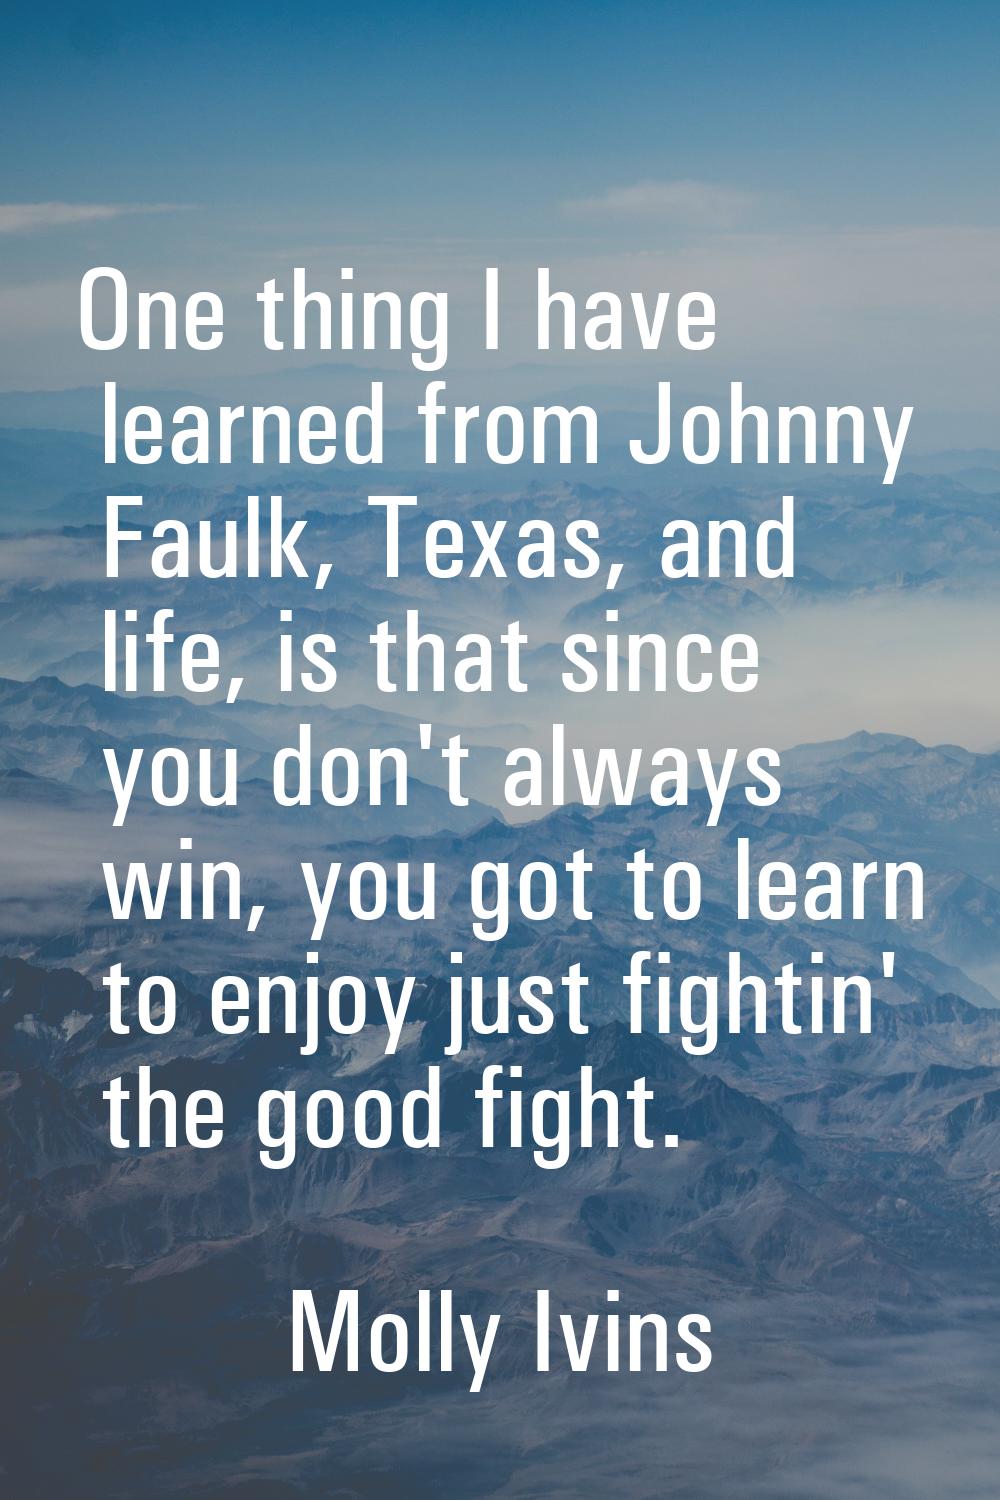 One thing I have learned from Johnny Faulk, Texas, and life, is that since you don't always win, yo